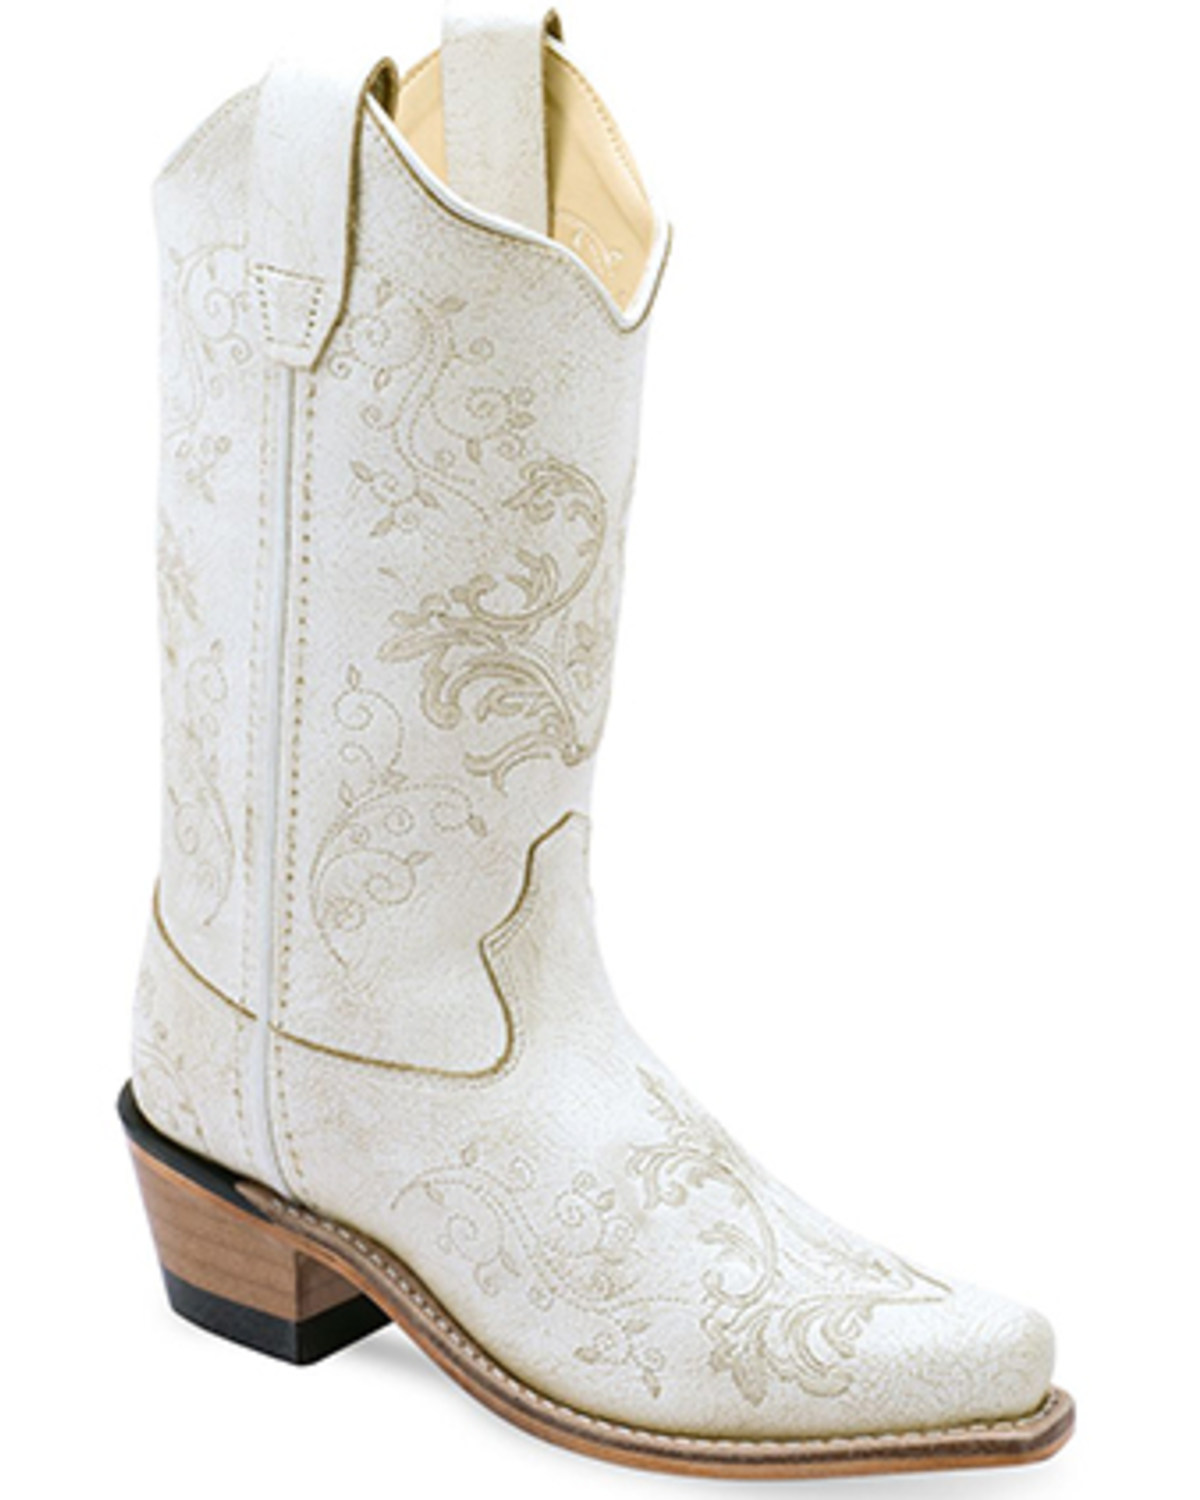 Old West Girls' Embroidered Western Boots - Snip Toe